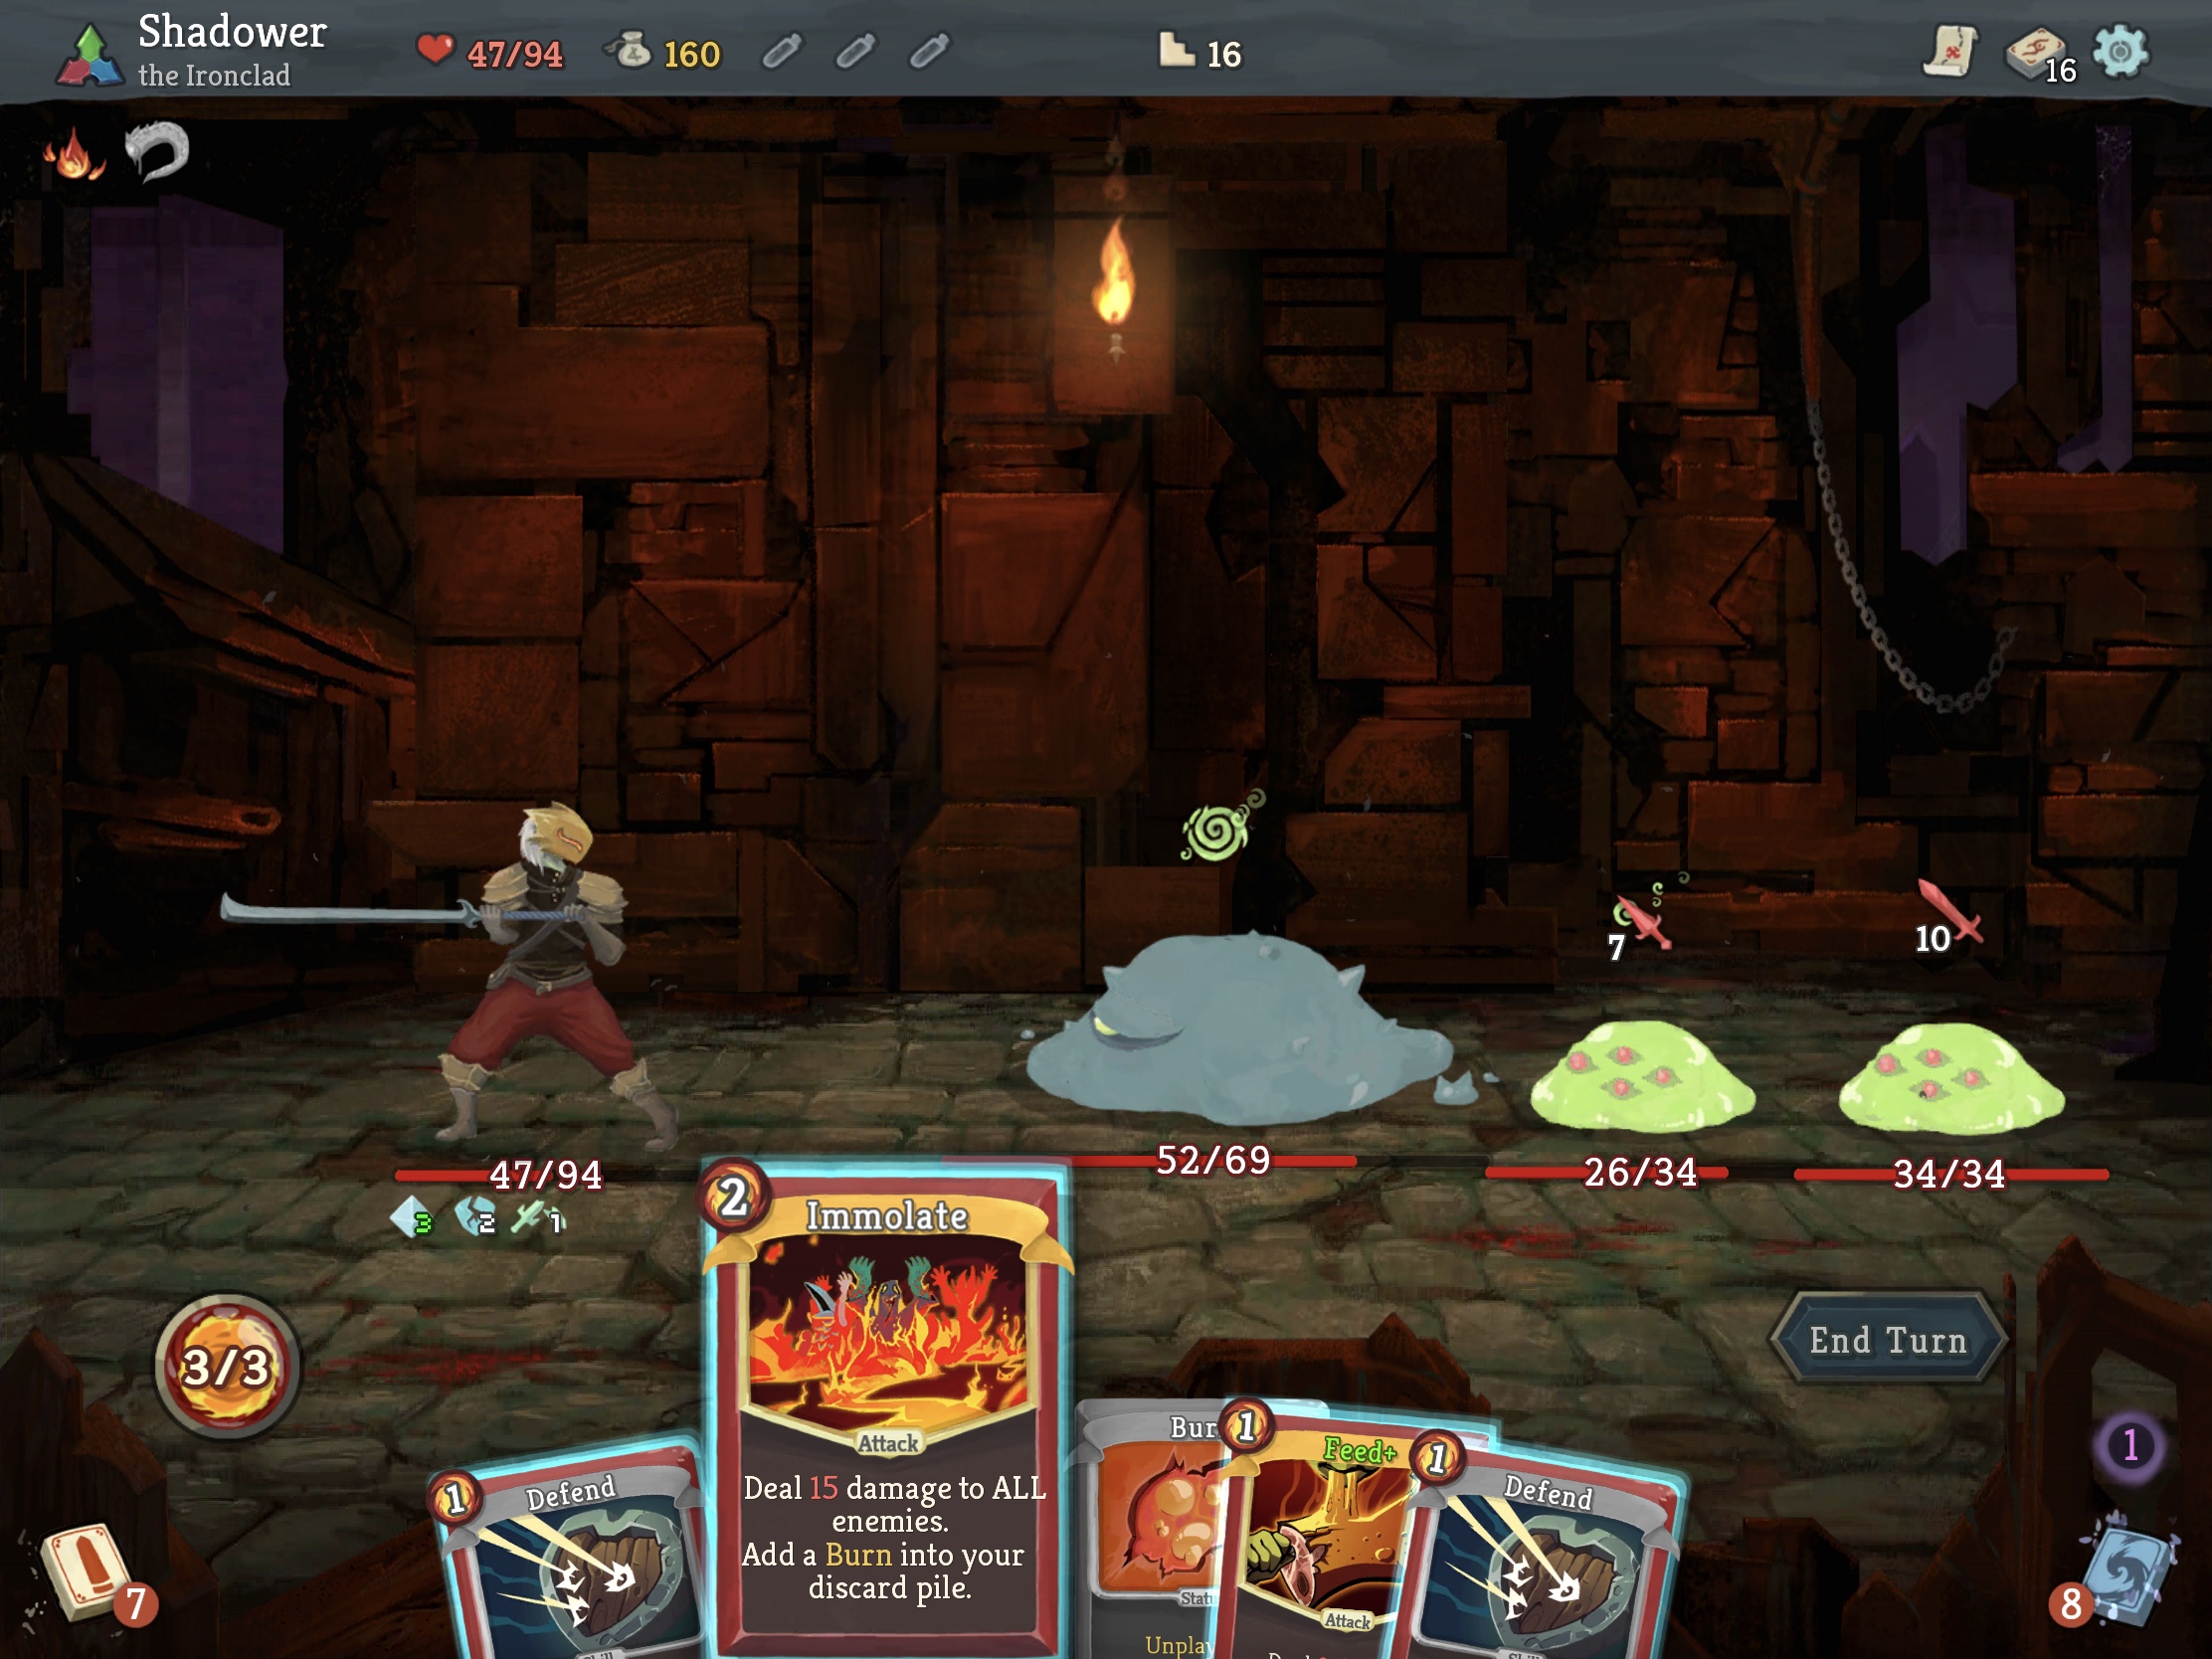 A warrior facing three blob monsters. A hand of five cards is visible, with the Immolate one being selected.